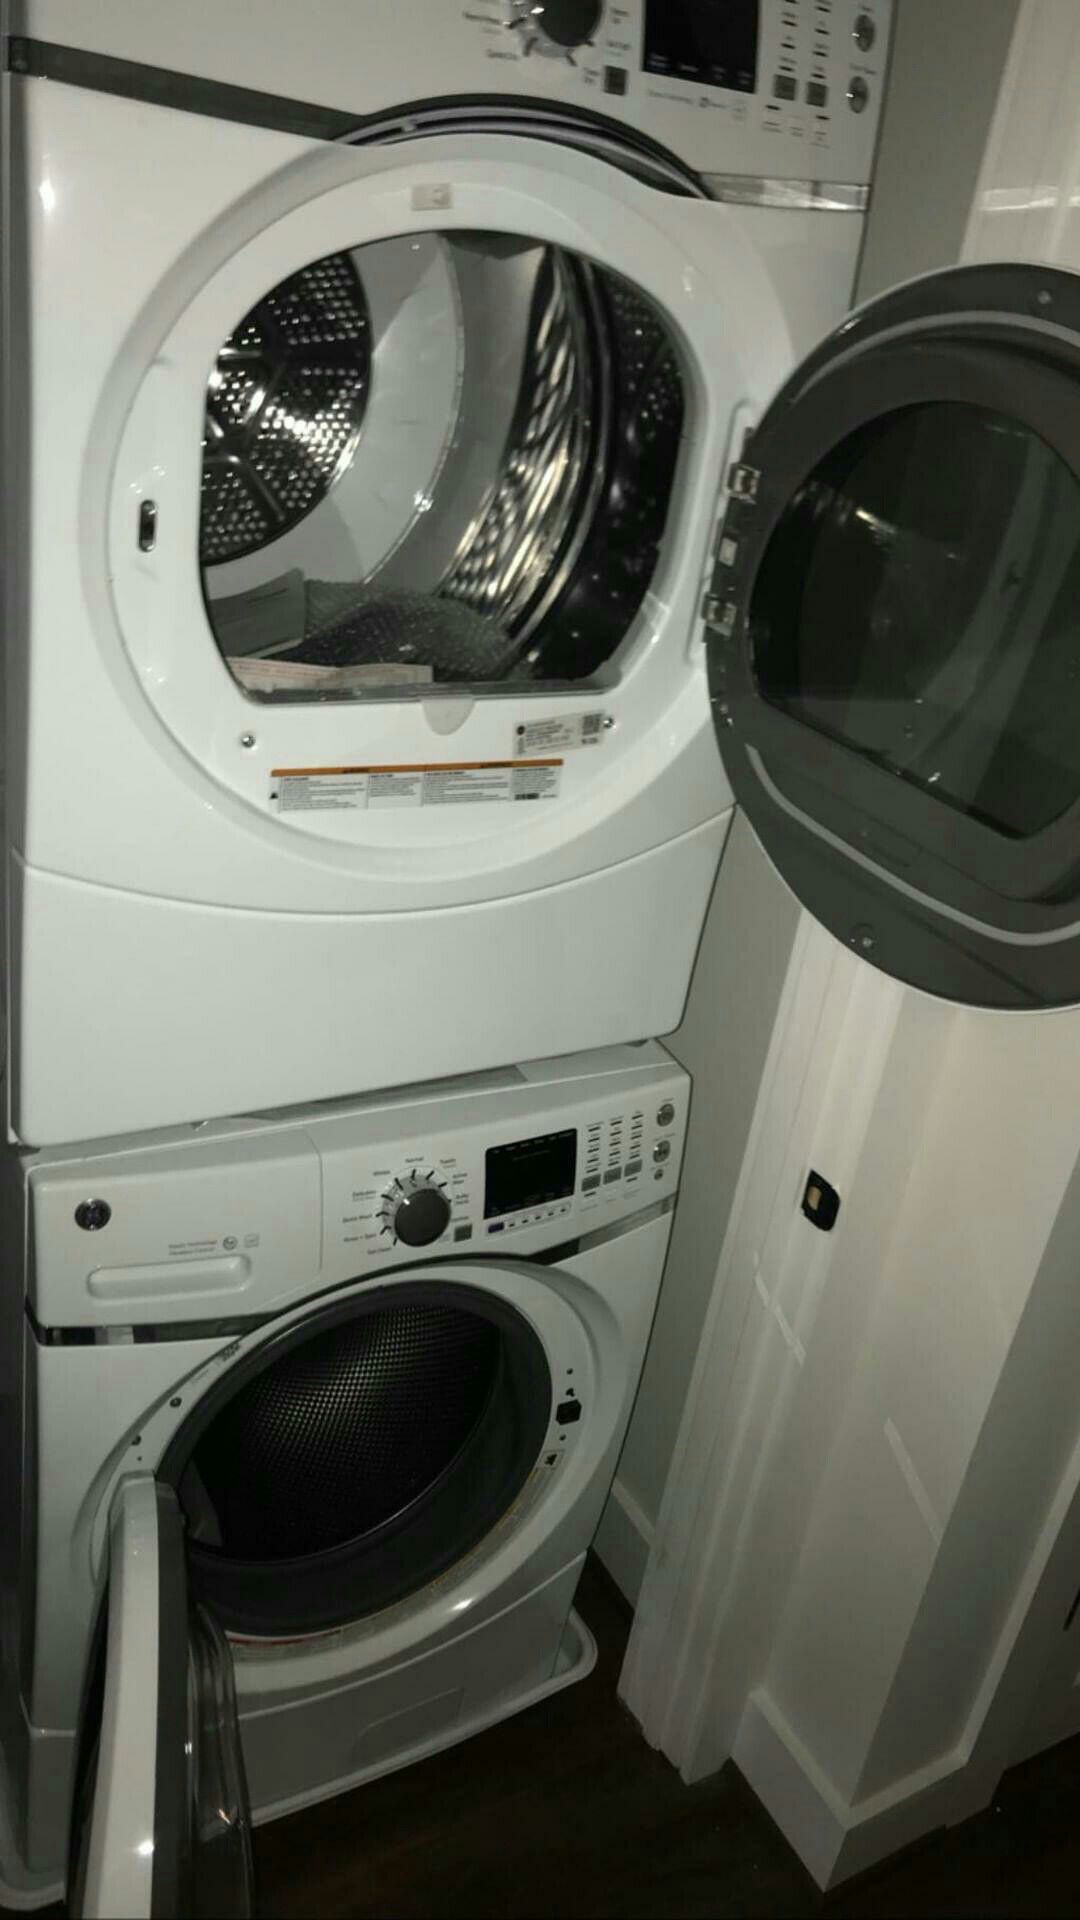 Brand new washer and dryer Ge